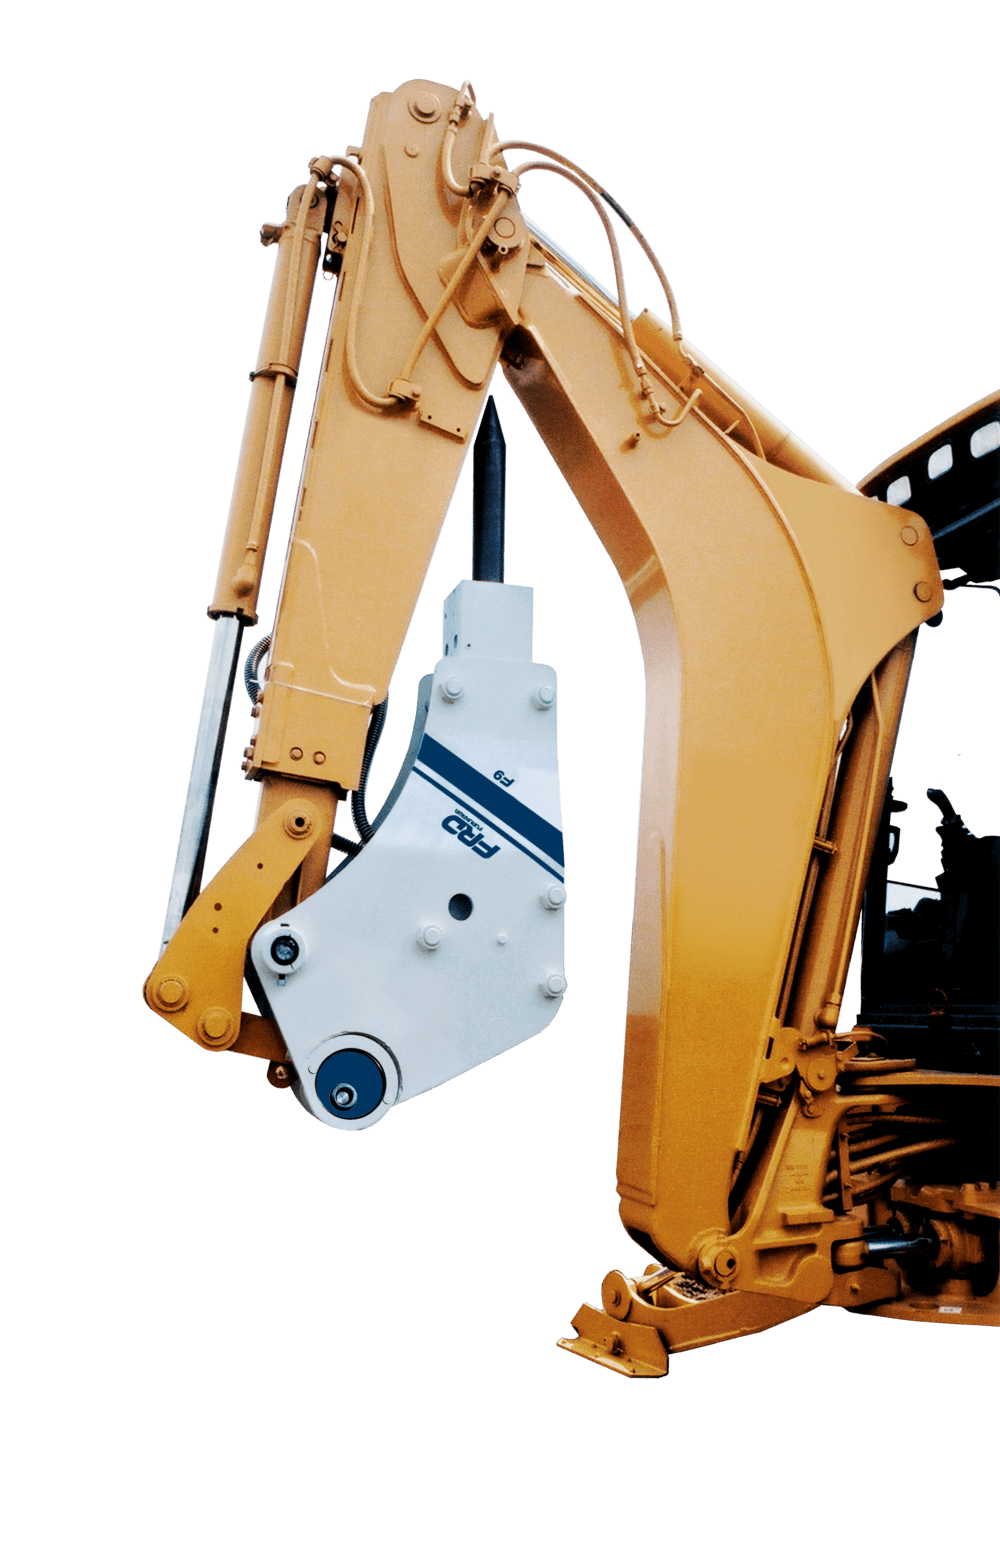 The F & Fx Medium Series rock breakers/hammers from Furukawa / FRD are available in a variety of mounting configurations enabling them to be easily attached to mini-excavators, skid-steer loaders & rubber-tired backhoes.